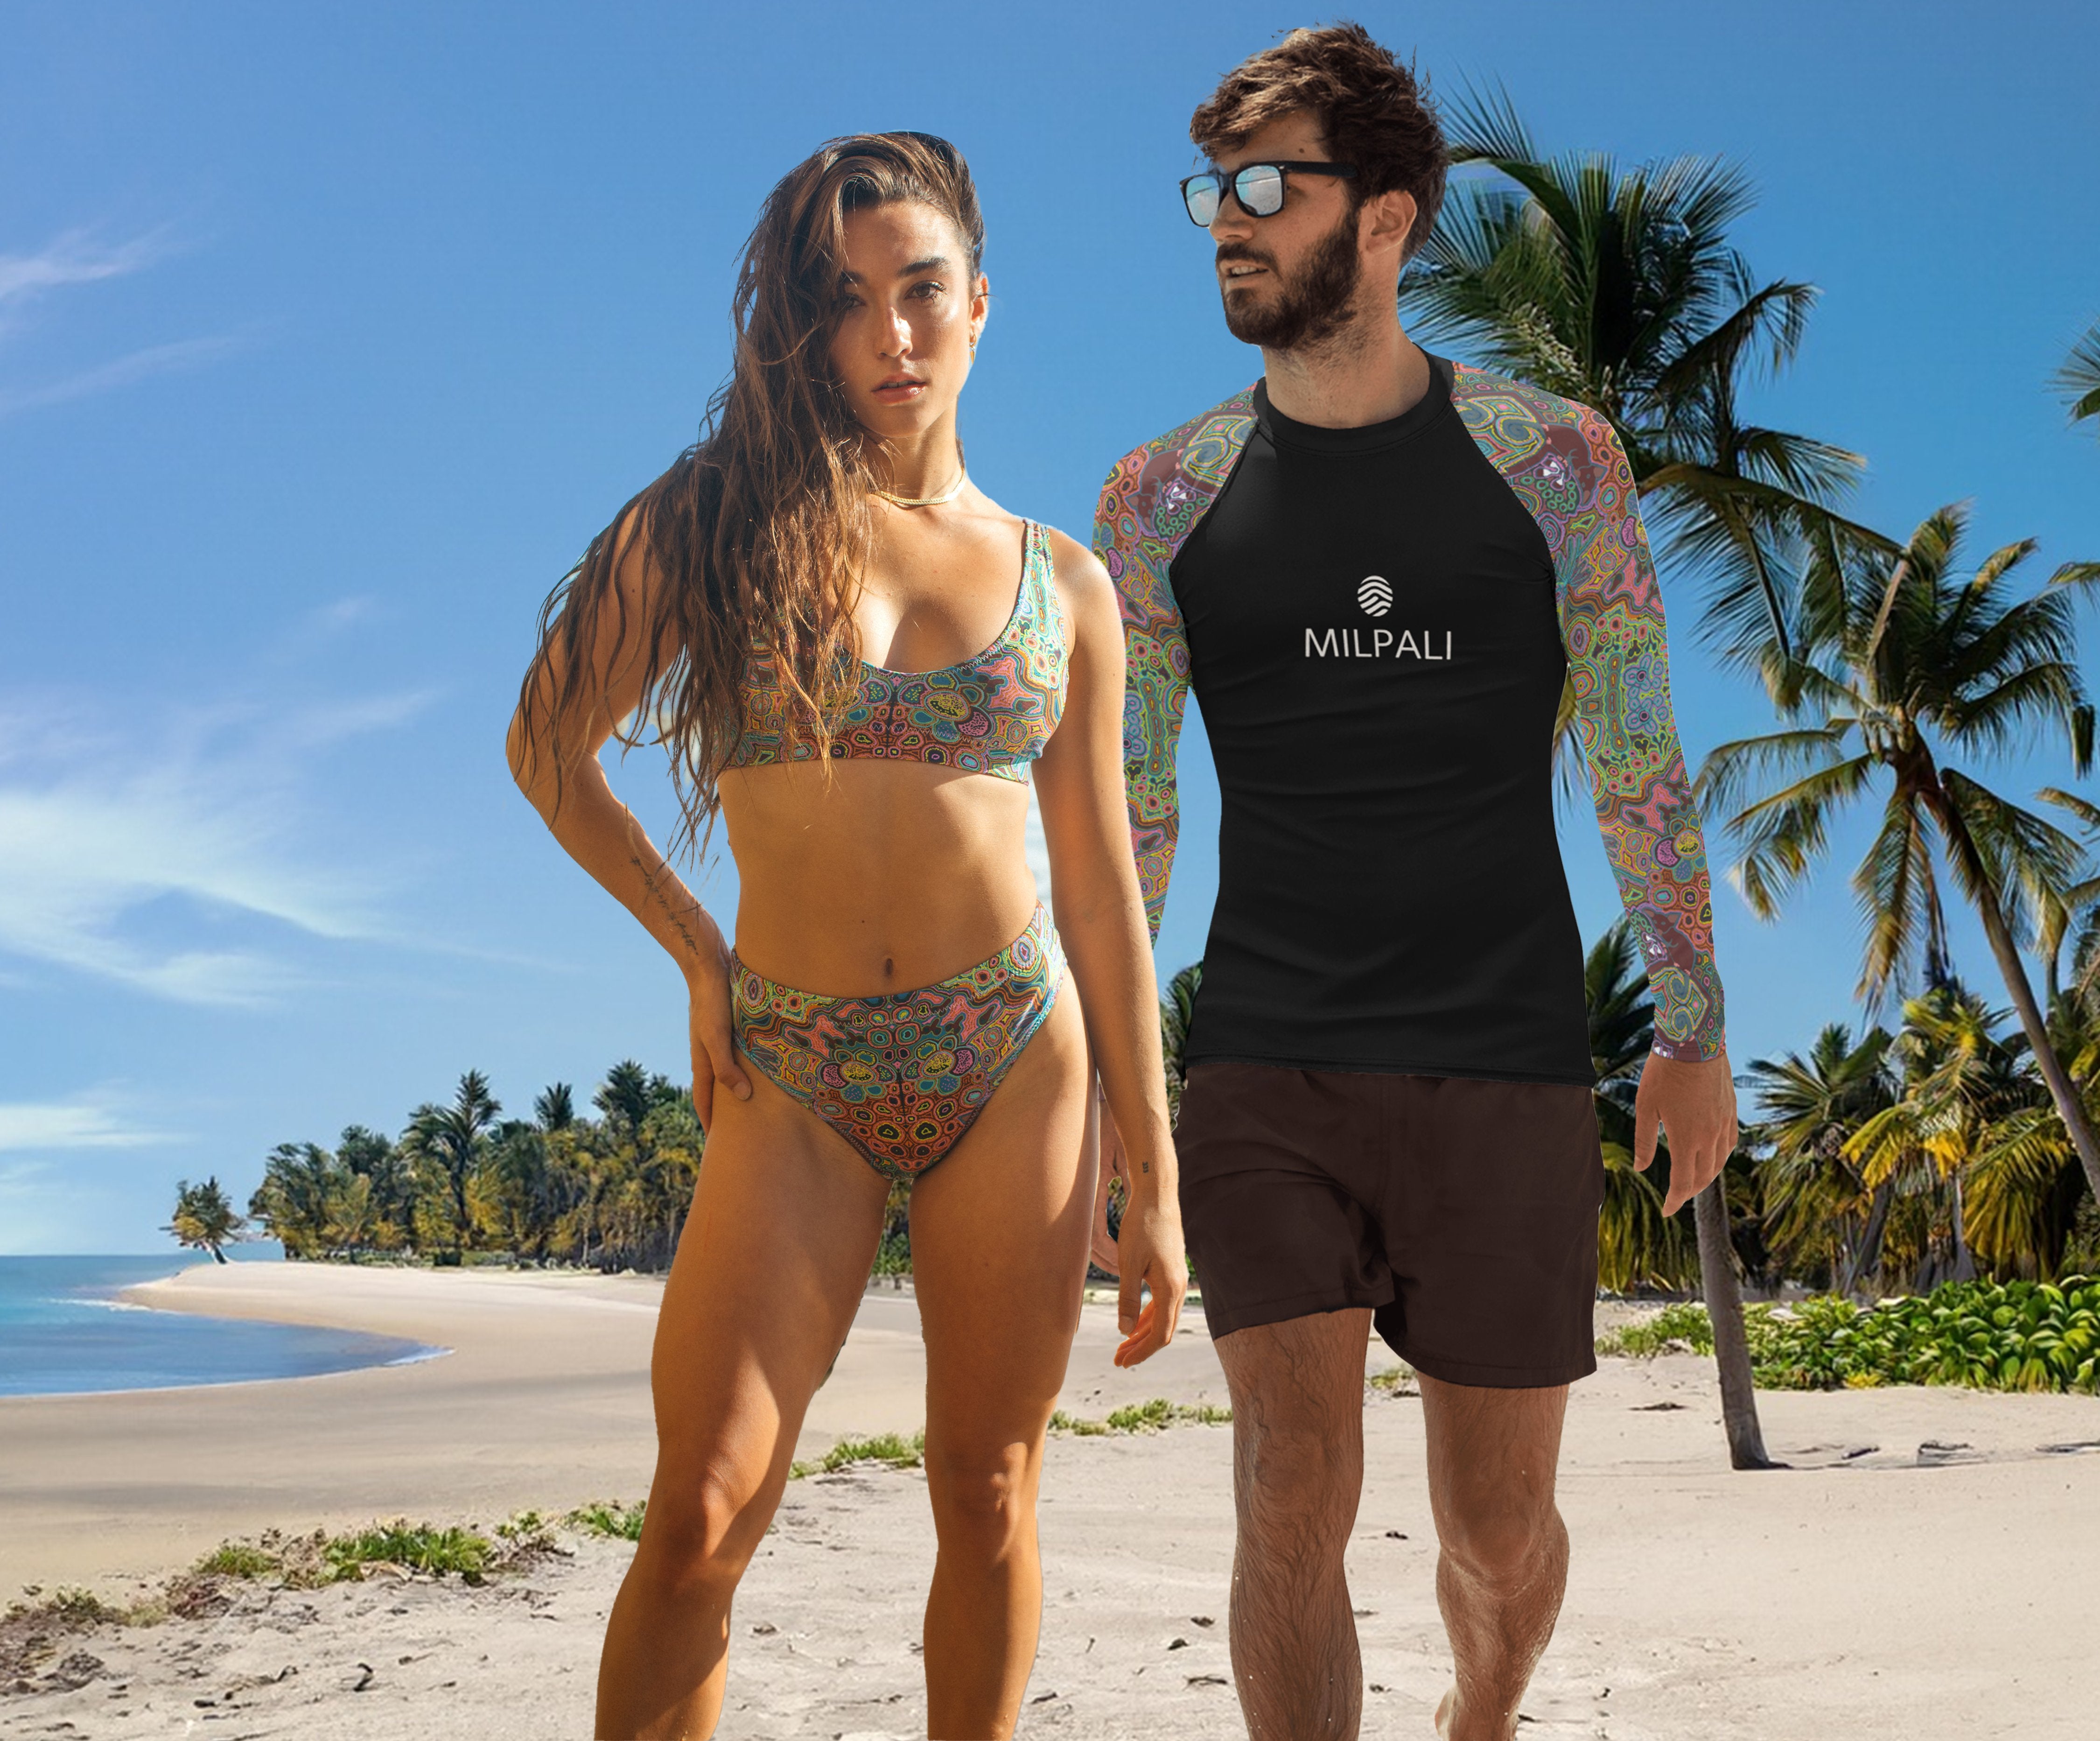 Matching swimsuits for couples – Milpali